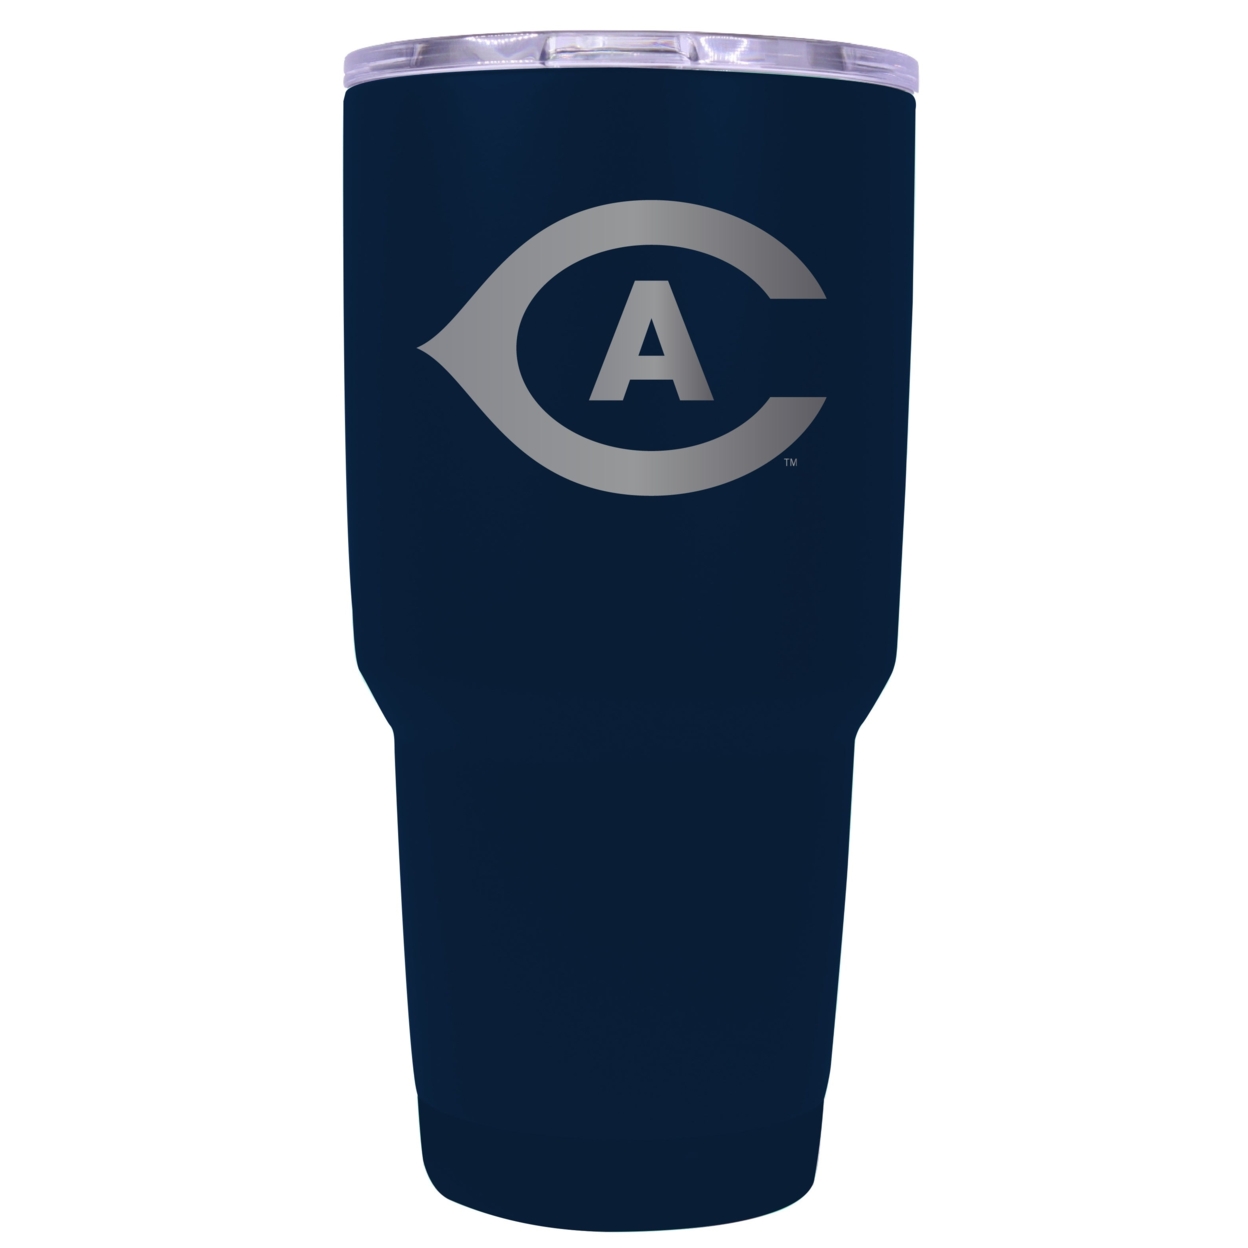 UC Davis Aggies 24 Oz Laser Engraved Stainless Steel Insulated Tumbler - Choose Your Color. - Navy